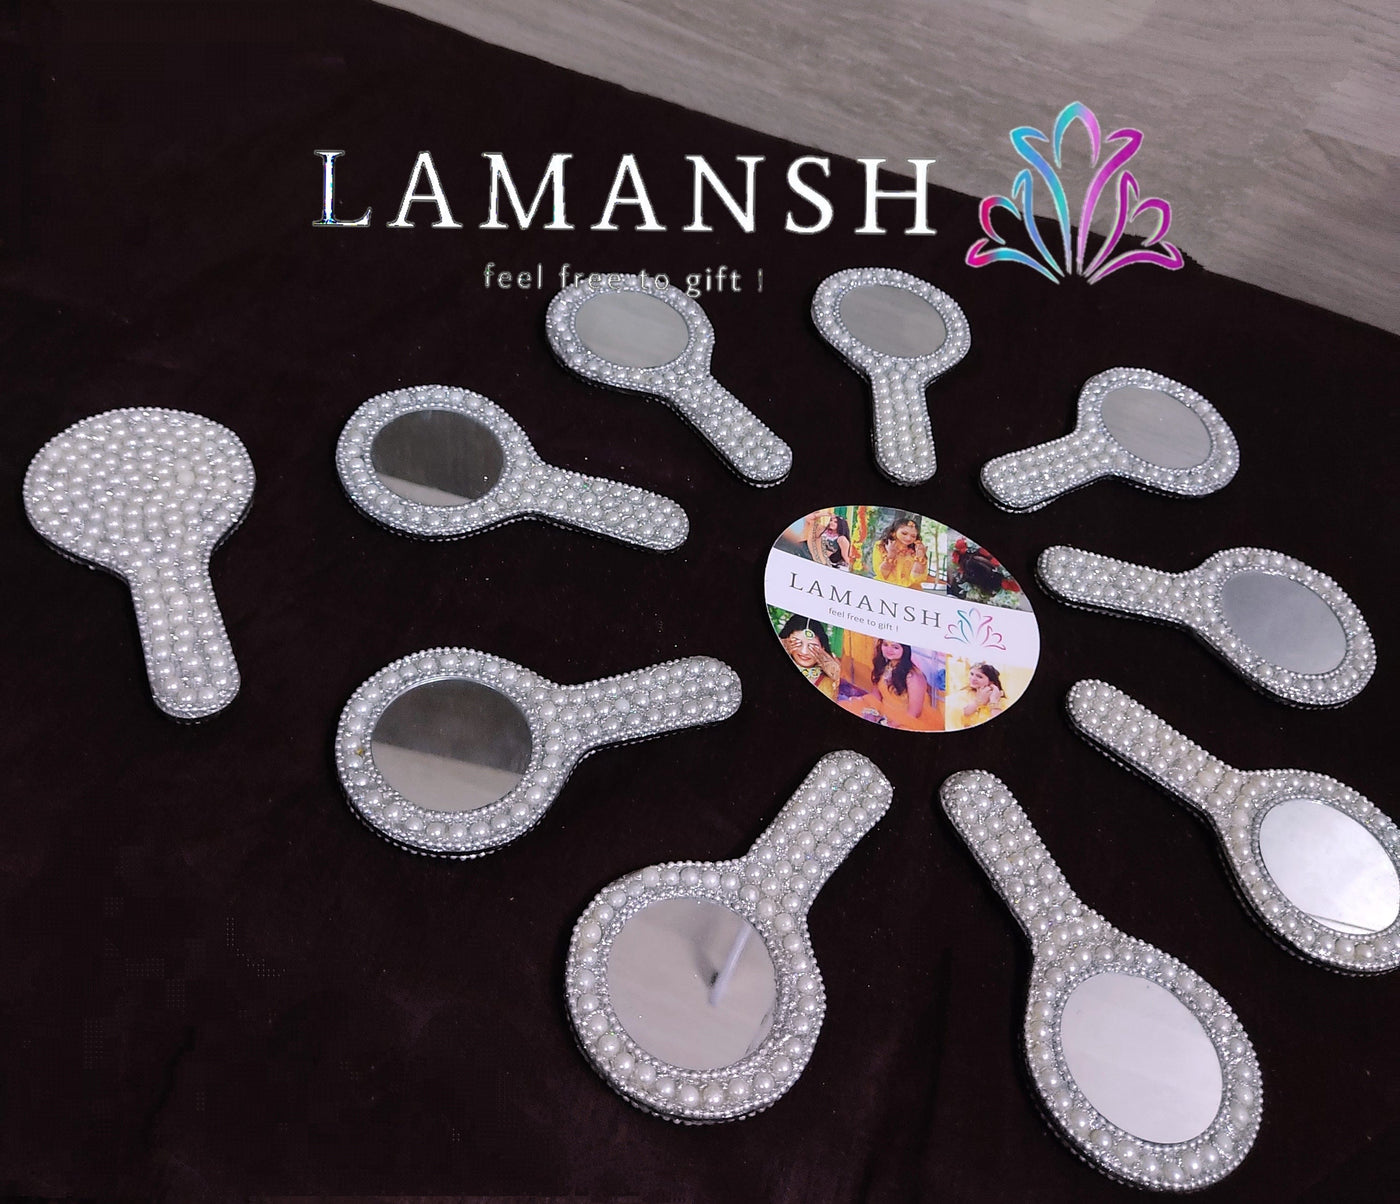 lamansh hand mirrors for gifting silver lakh work standard lamansh pack of 20 small size round handheld purse mirror for women and men ergonomic compact magnifying hand mirror for